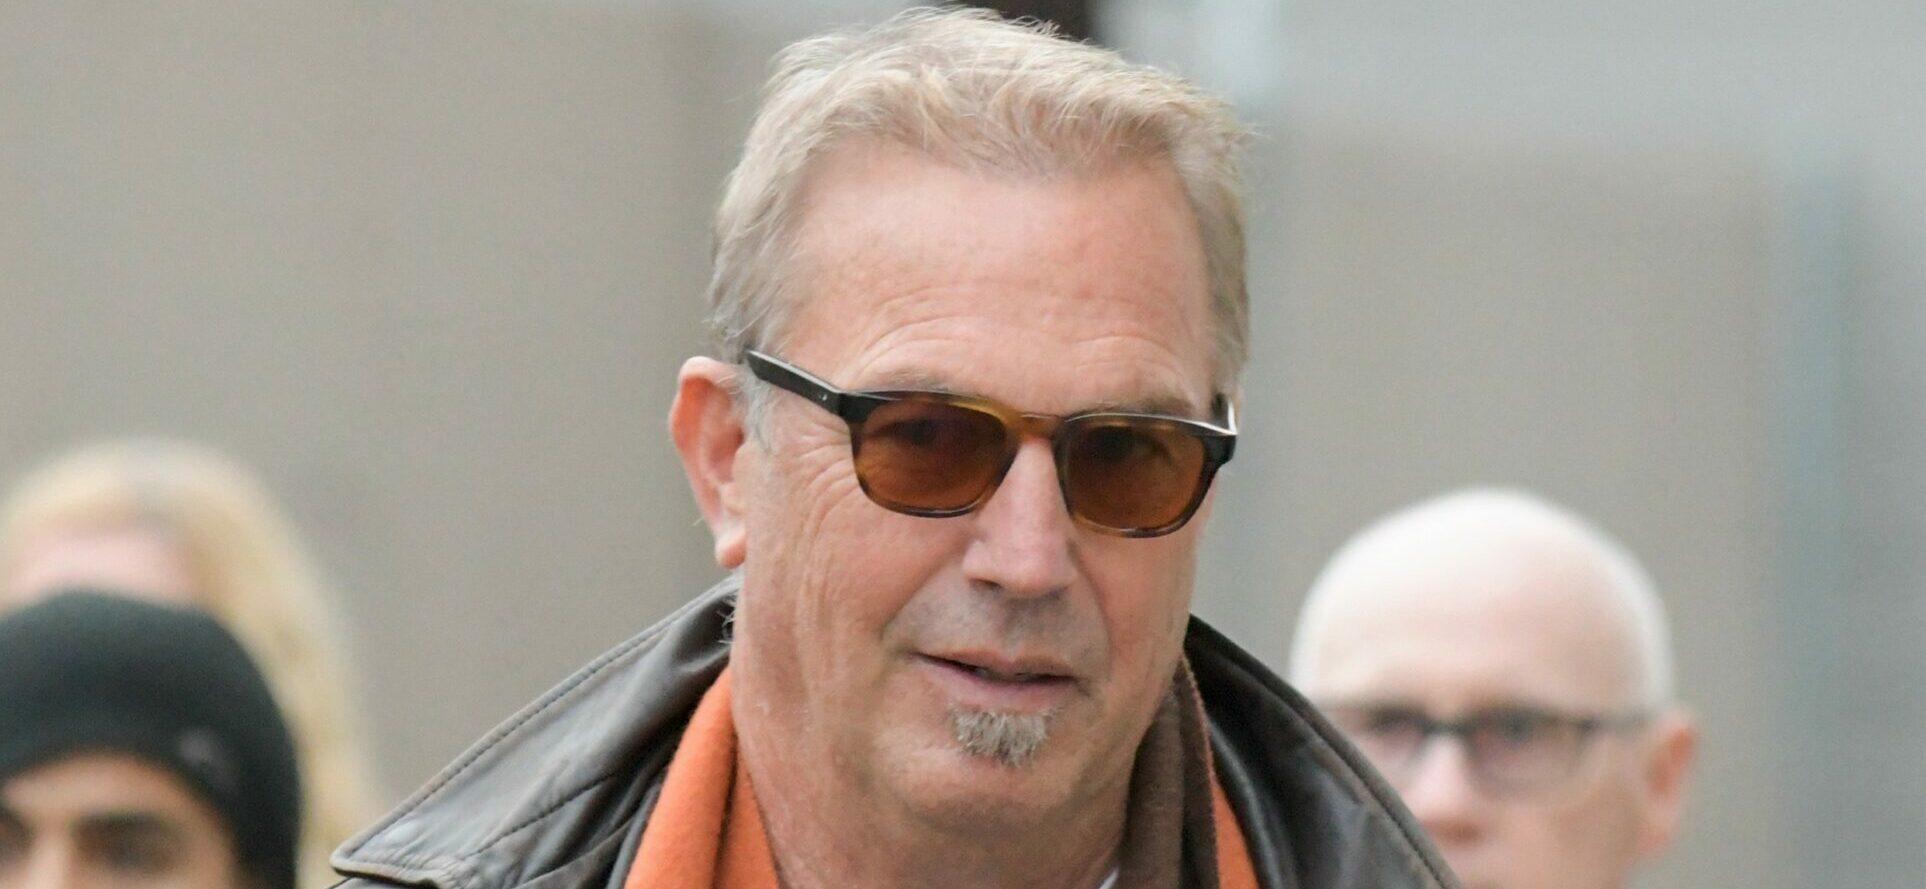 Kevin Costner is seen arriving at 'Jimmy Kimmel Live' in Los Angeles